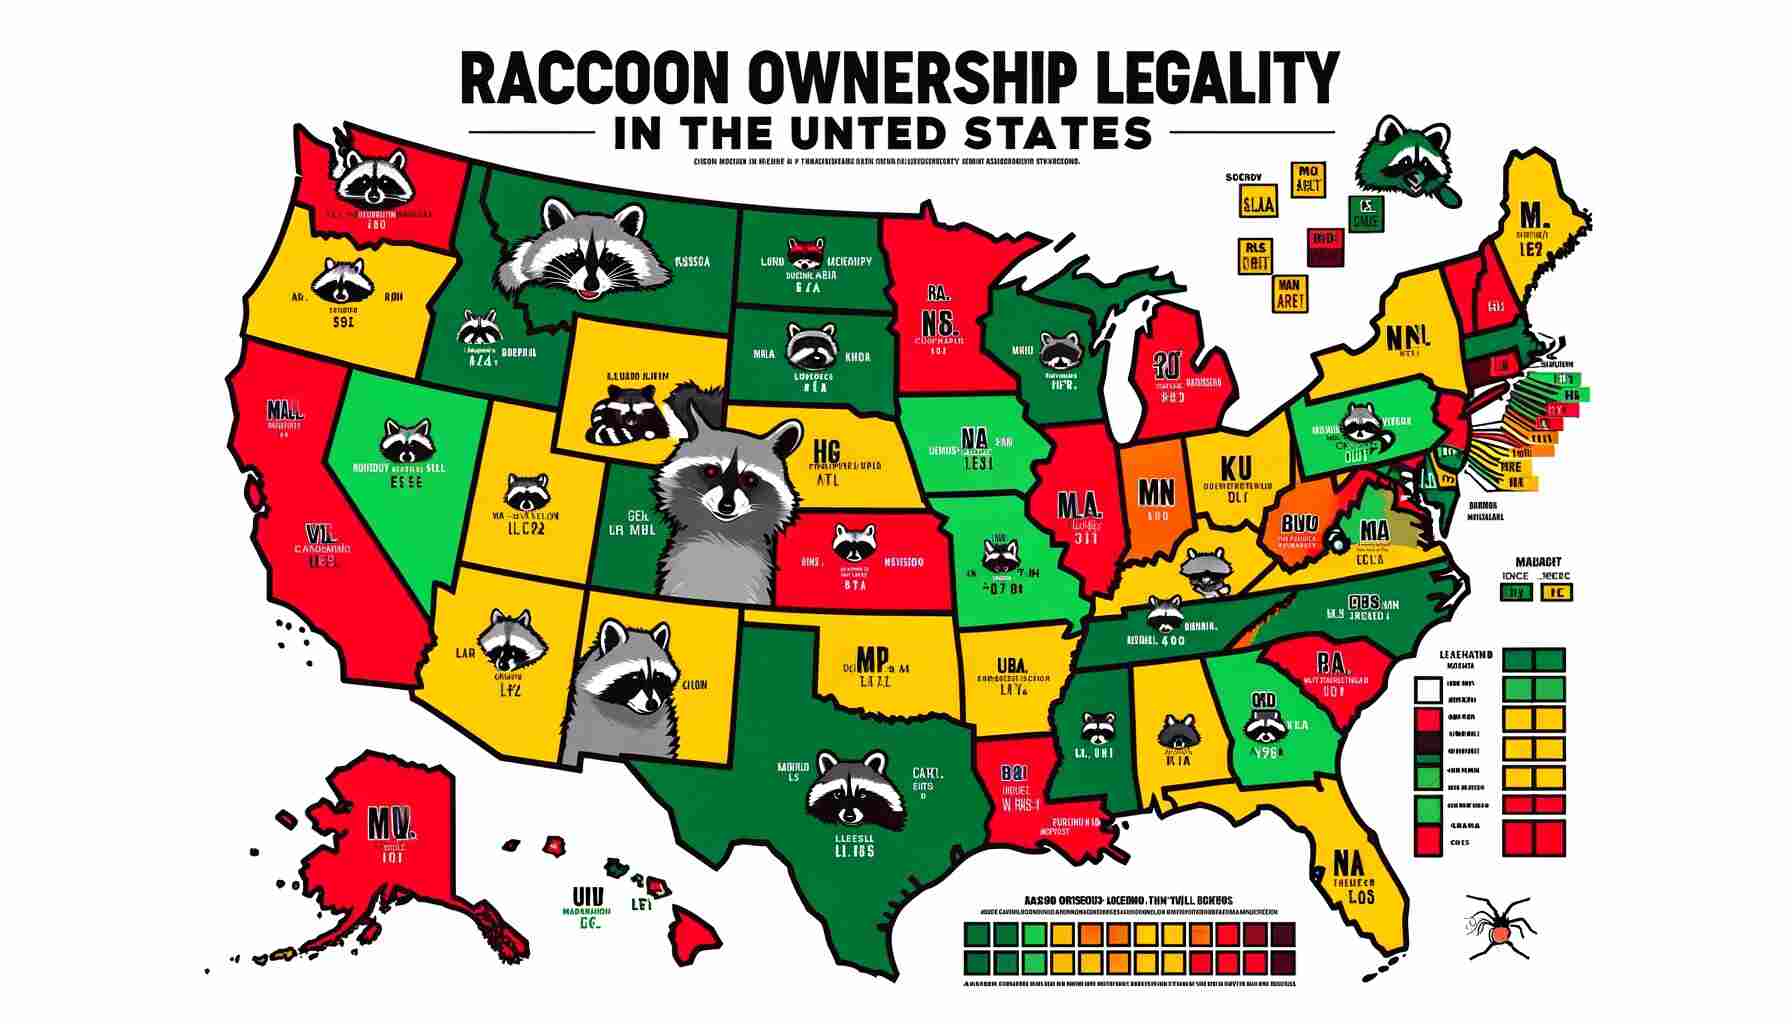 Here is a map with a clear title, "Raccoon Ownership Legality in the United States." The map provides a visual representation of the legal status of raccoon ownership in each state, with color coding as described in the legend. This map offer a comprehensive and easy-to-understand overview of the regulations across the country.